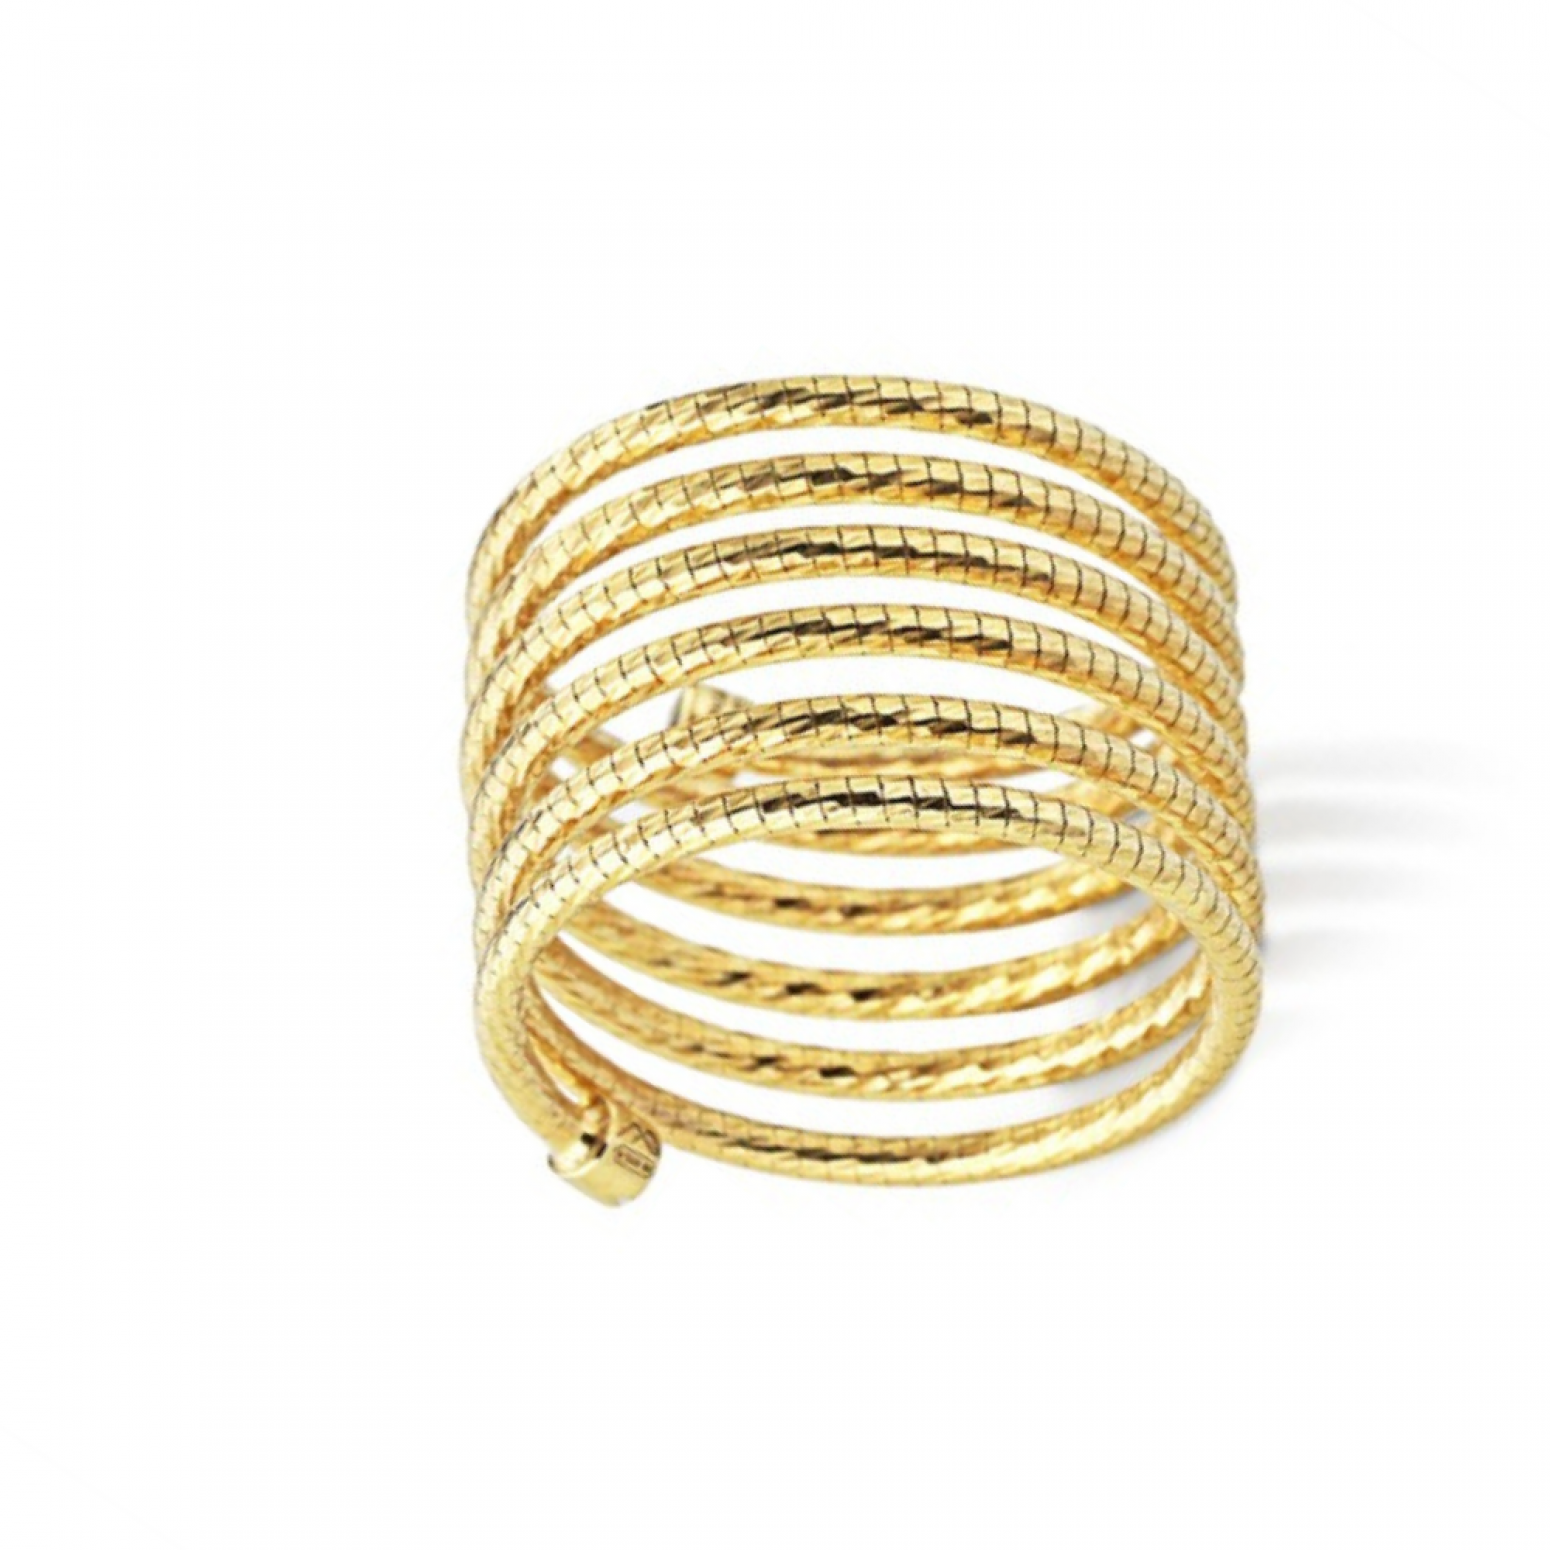 Marcello Pane ring with gold plated silver, ANCC 004, da4333 RINGS Κοσμηματα - chrilia.gr